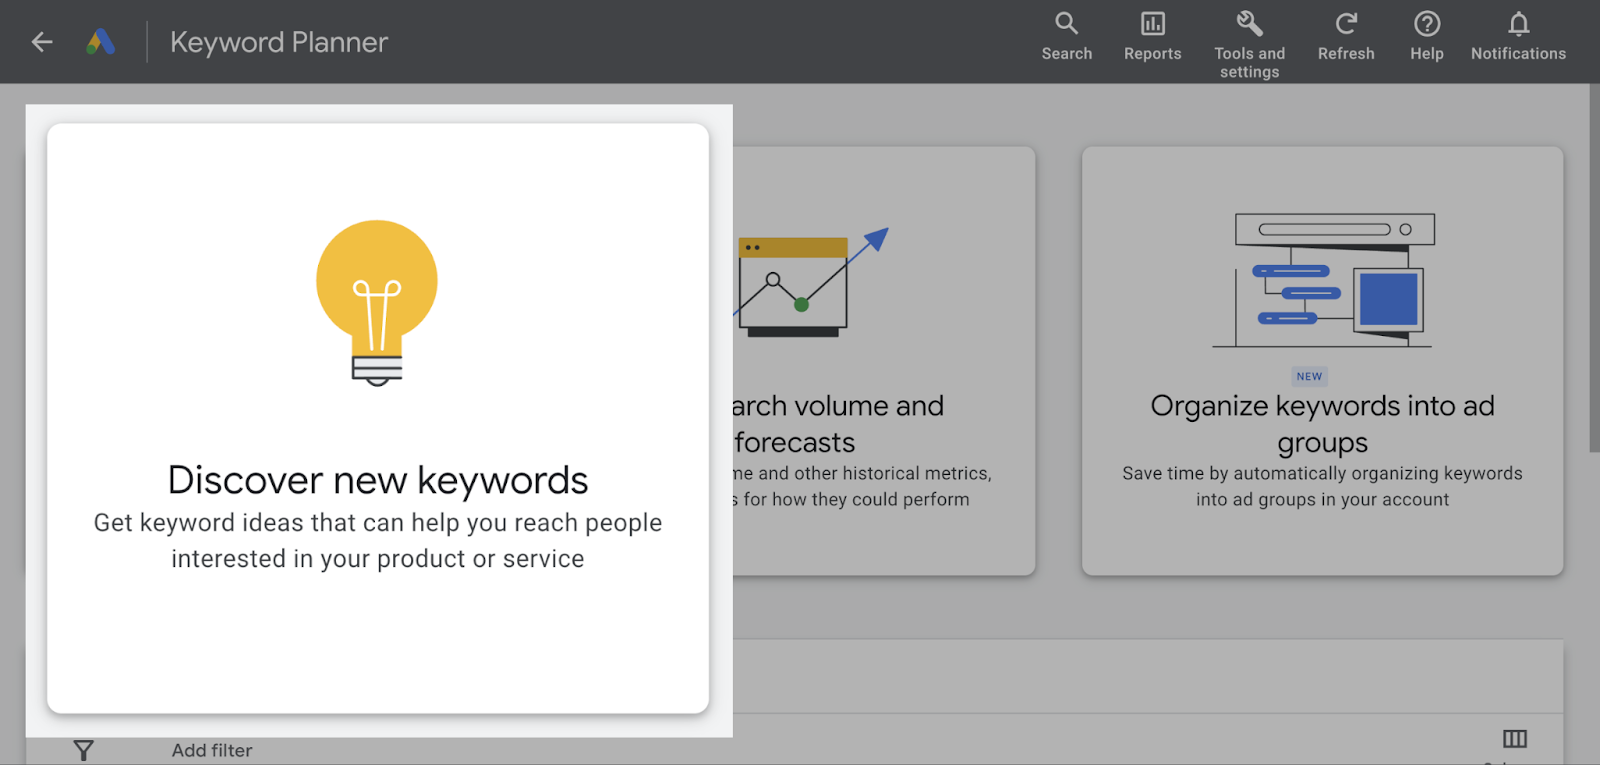 “Discover new keywords” section in Google’s Keyword Planner